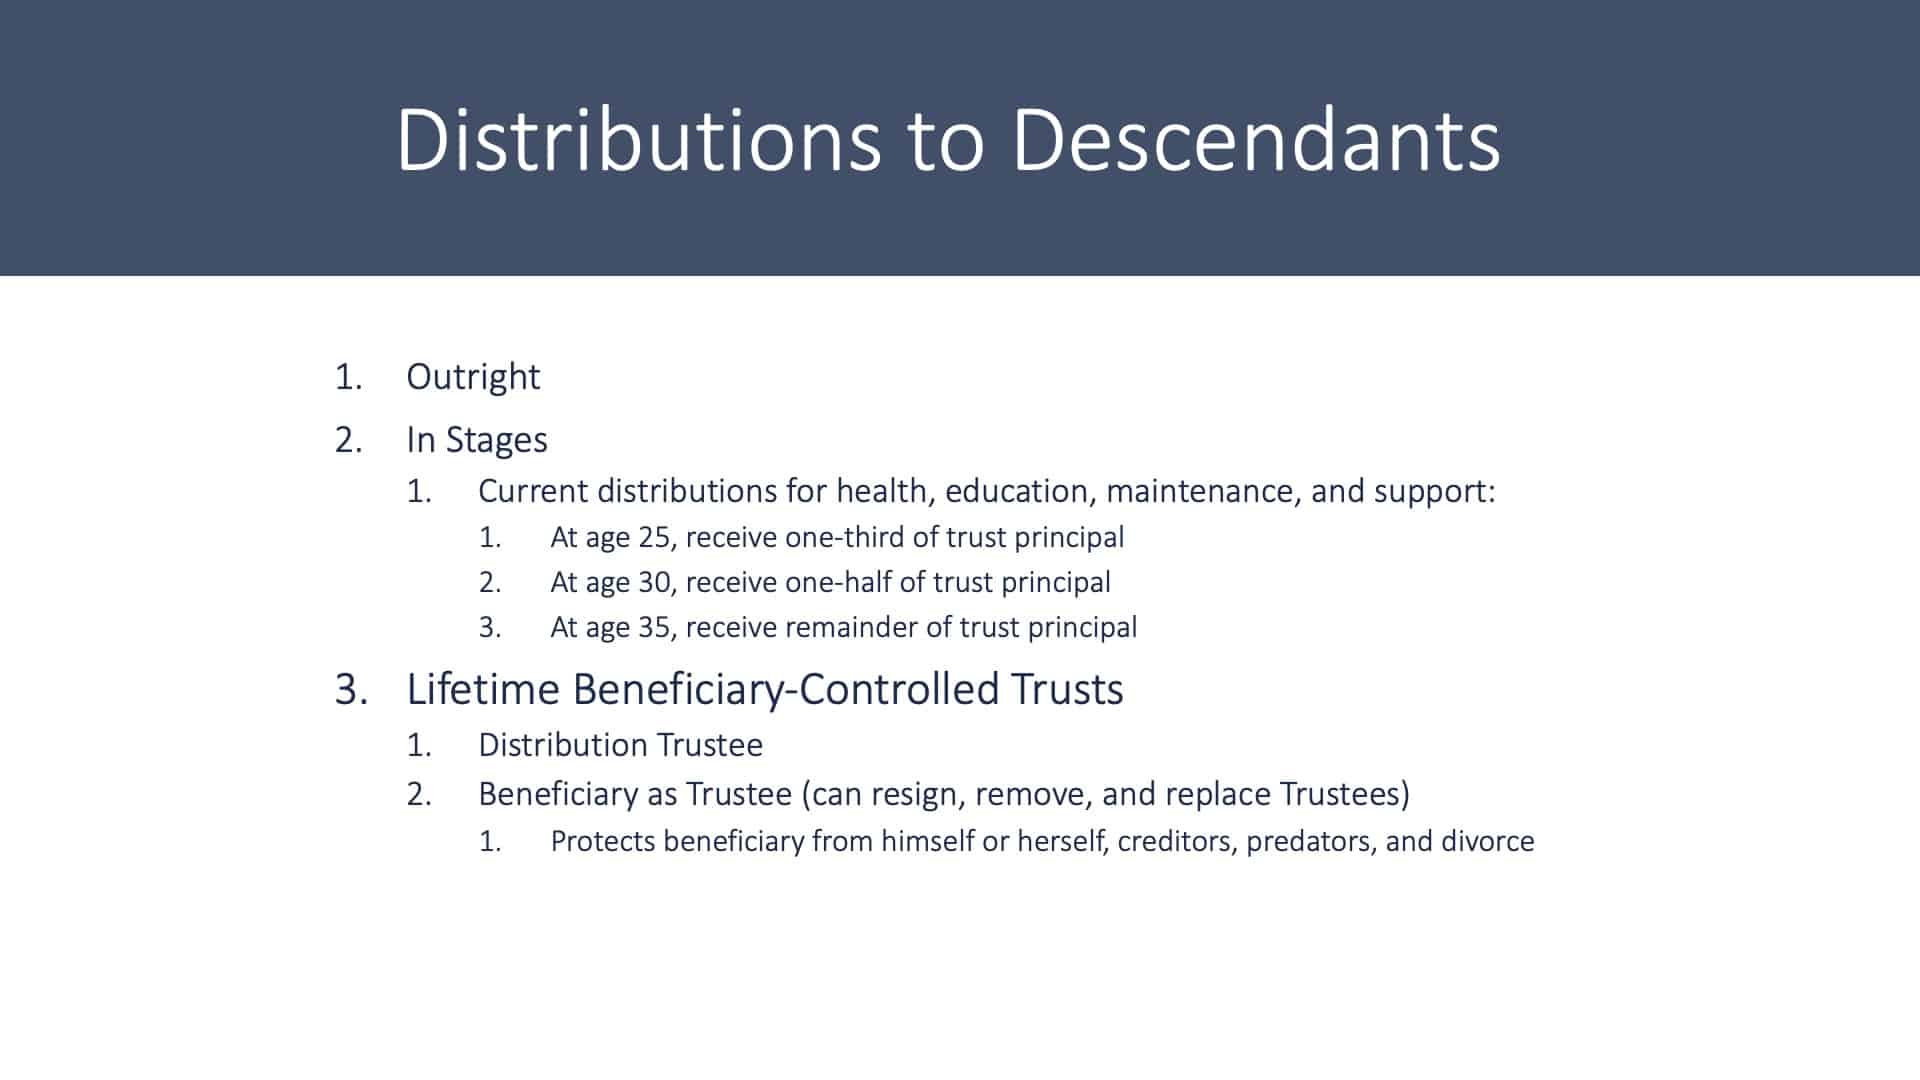 Is a Will Enough? - Distributions to Descendants